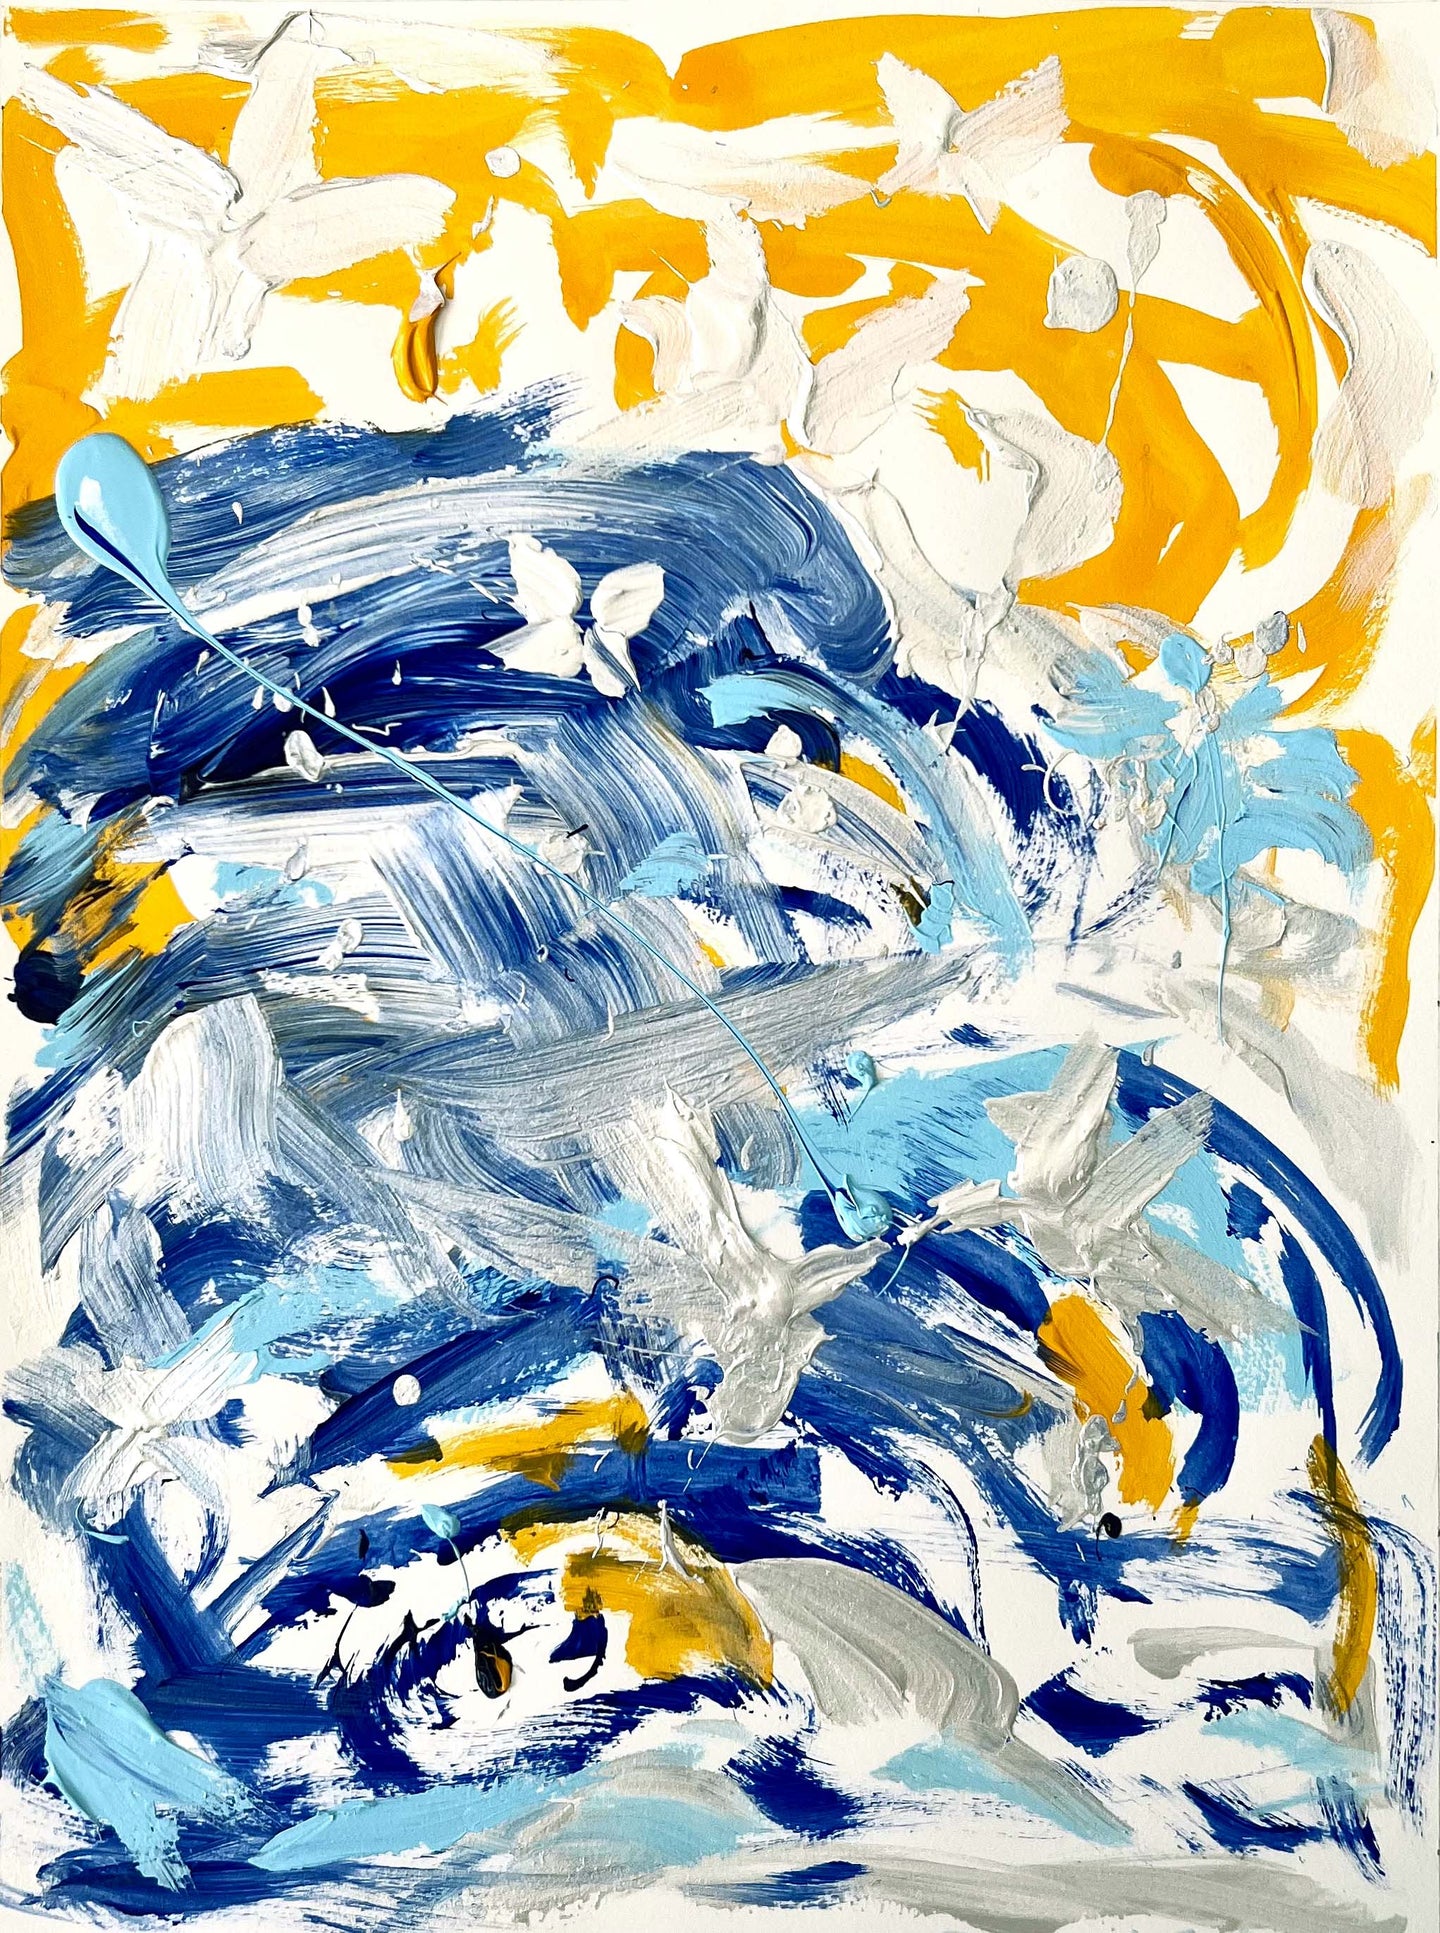 Carol Calicchio’s Blue and Yellow Abstract Painting for the Ritz Carlton South Beach, Abundant Love, 2022, Oil painting on paper, 16 x 12 inches, for sale at Manolis Projects